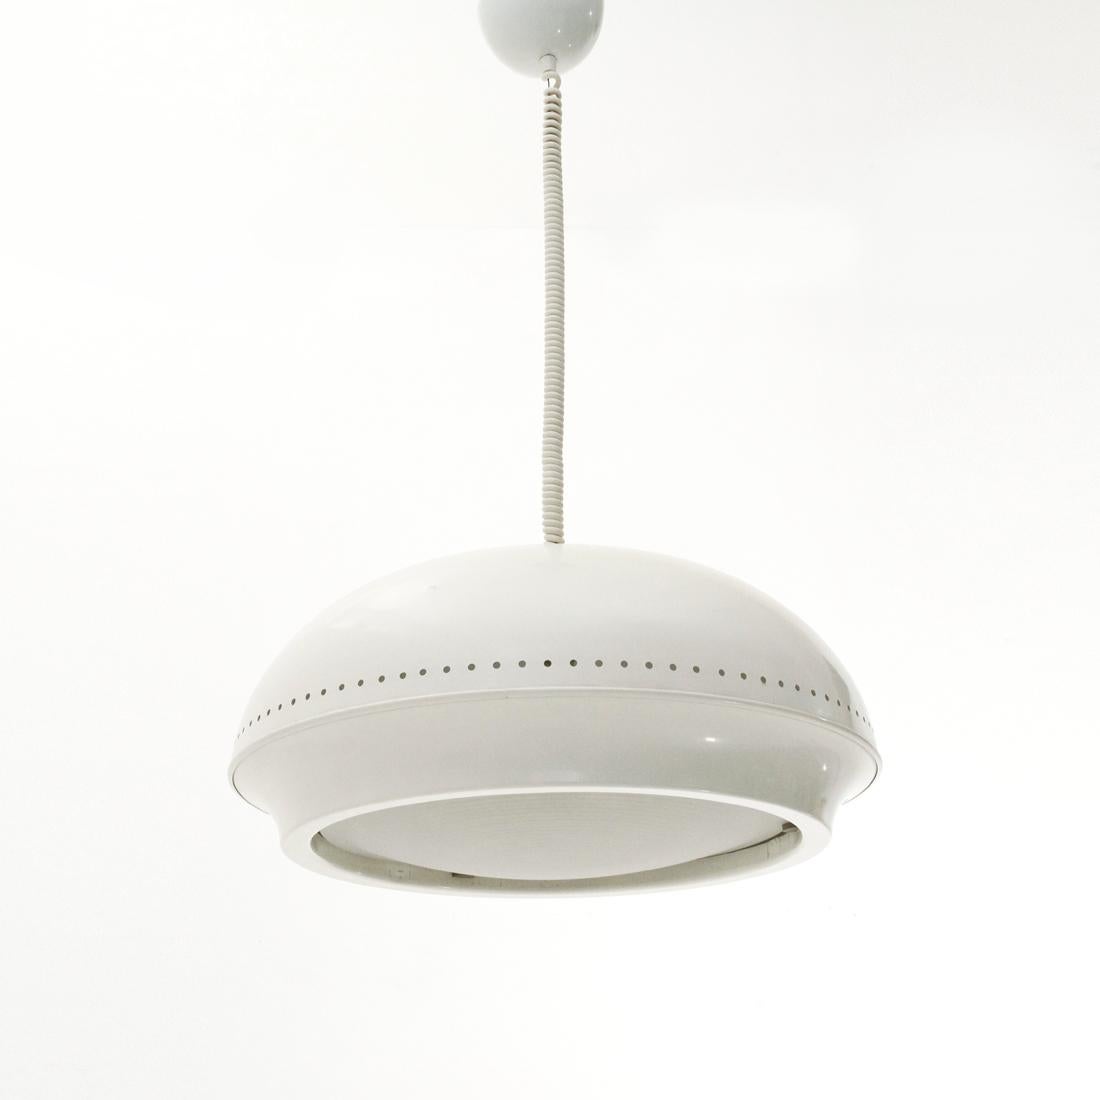 Chandelier produced in the 1960s by Flos on a project by Tobia Scarpa.
White painted metal ceiling rose.
White painted metal cap.
Glass screen.
Good general condition, some signs and lack of paint due to normal use of time, 2 small